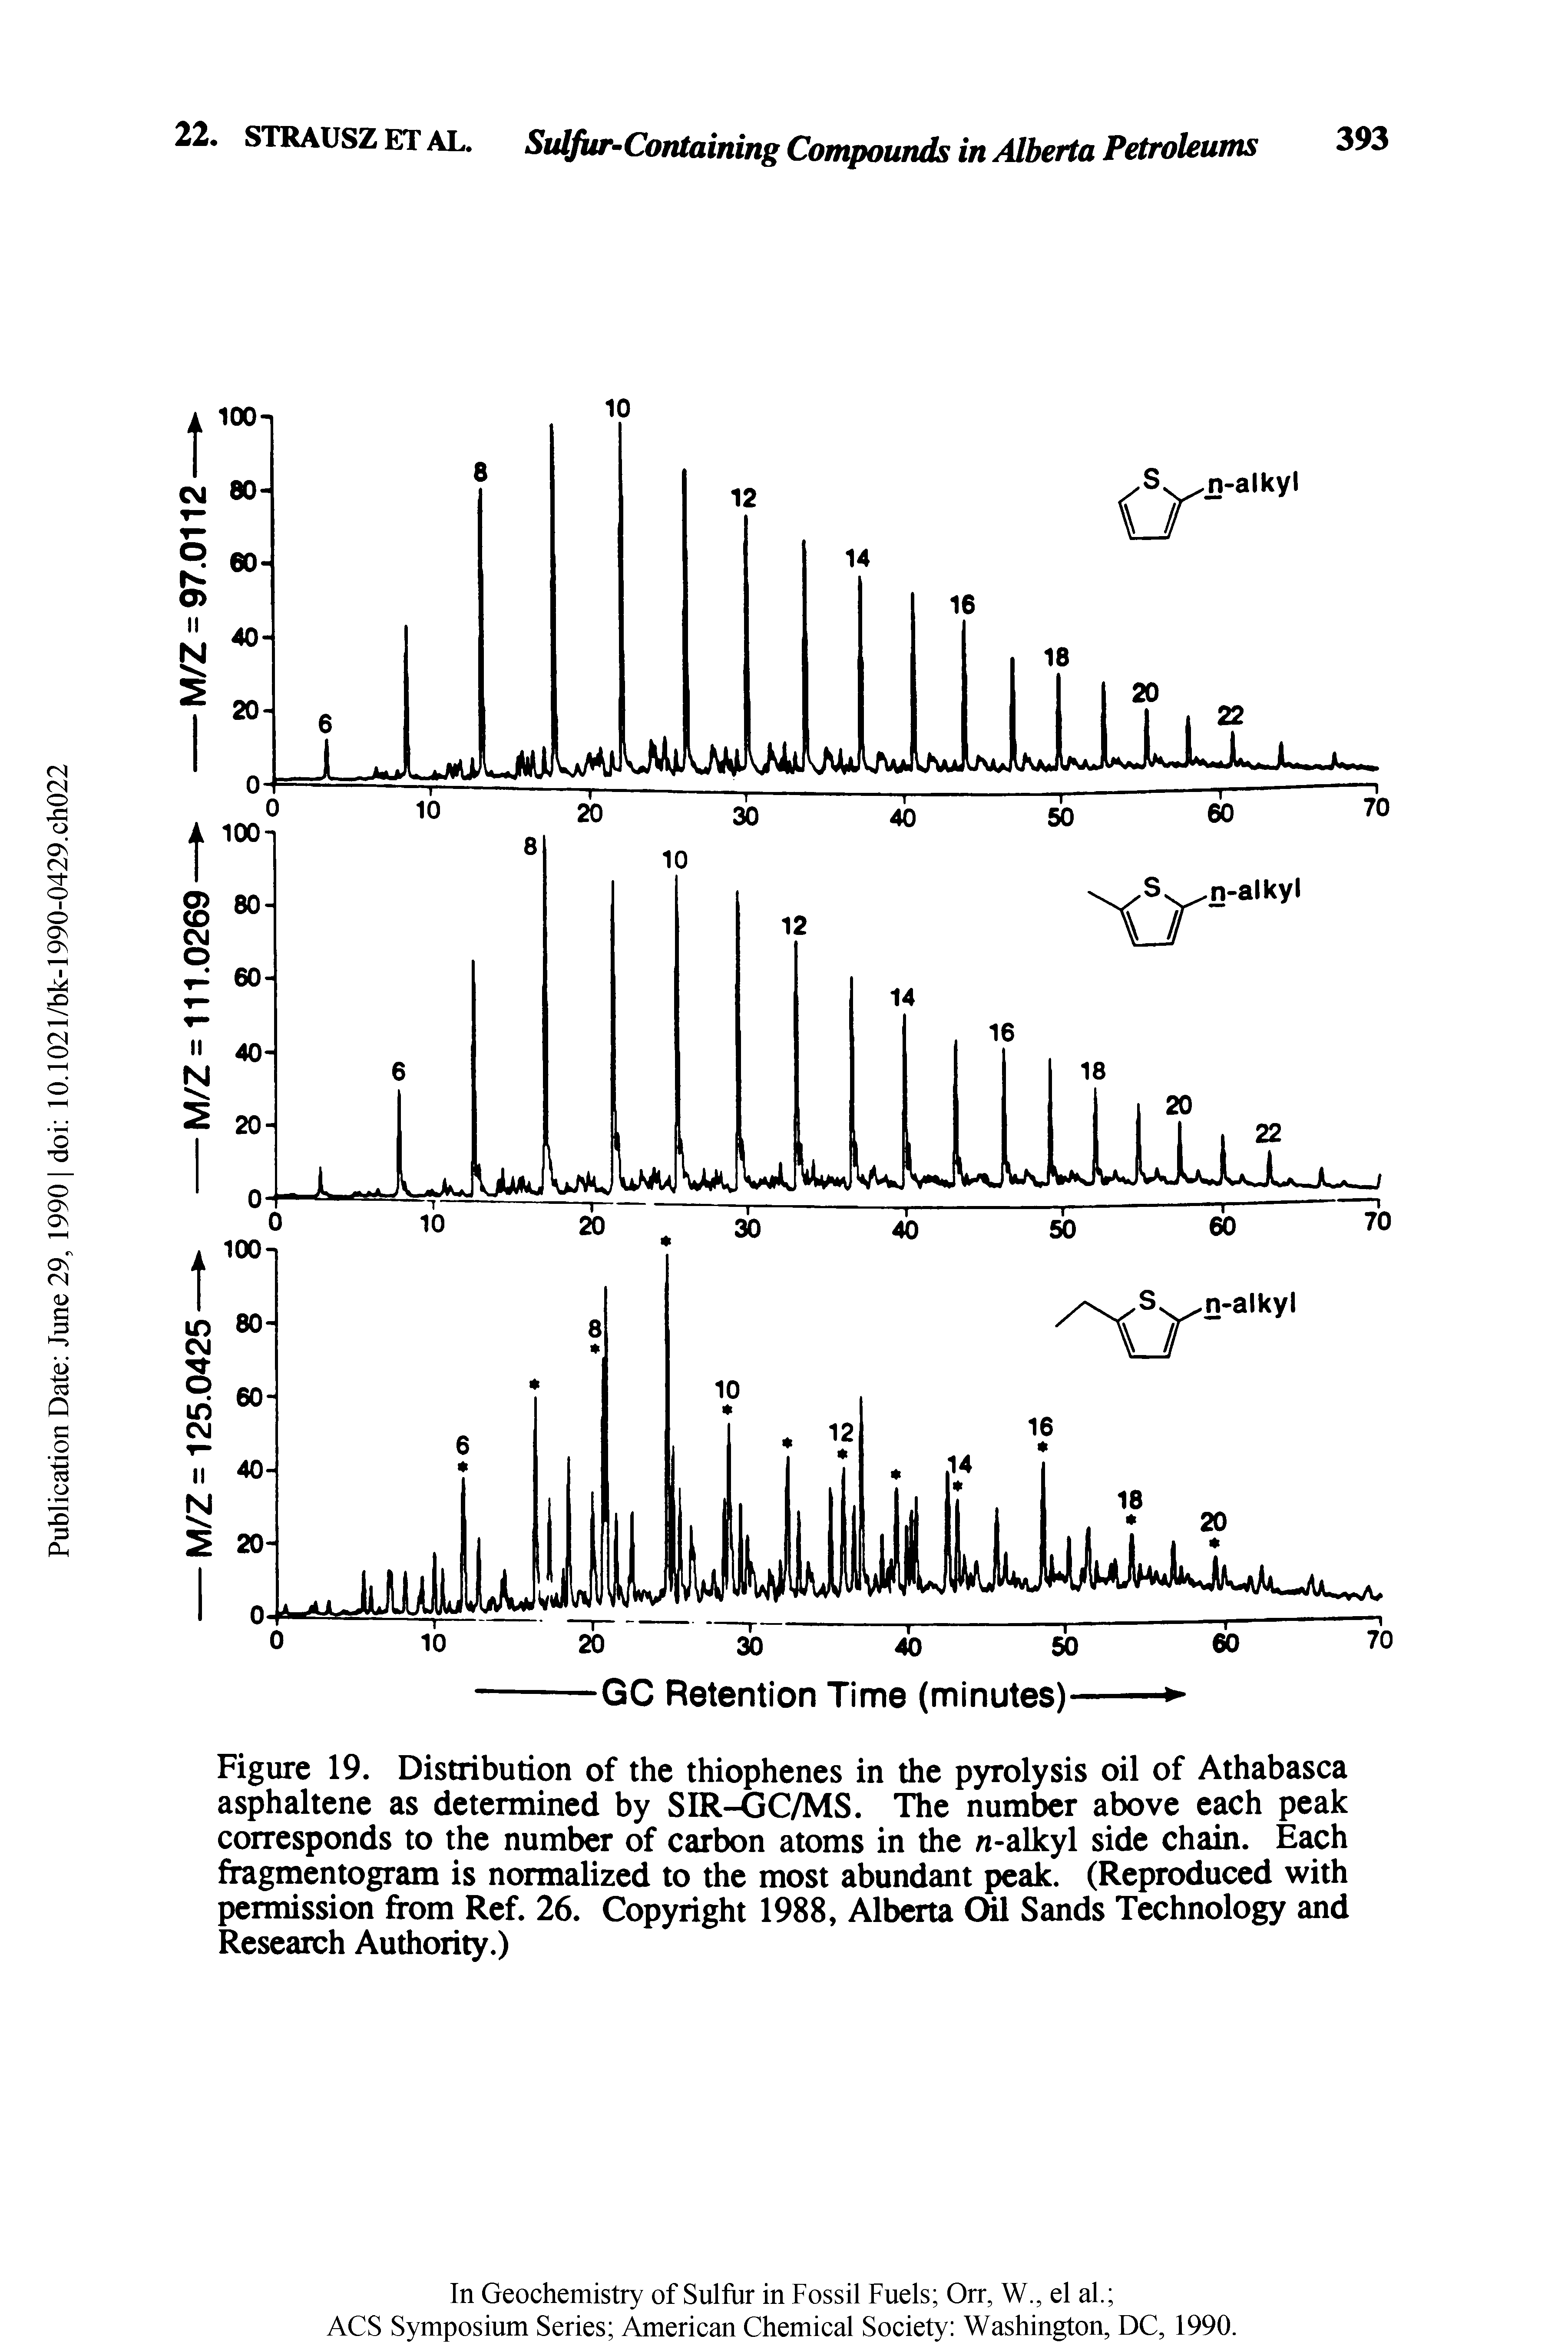 Figure 19. Distribution of the thiophenes in the pyrolysis oil of Athabasca asphaltene as determined by SIR-GC/MS. The number above each peak corresponds to the number of carbon atoms in the n-alkyl side chain. Each fragmentogram is normalized to the most abundant peak. (Reproduced with permission from Ref. 26. Copyright 1988, Alberta Oil Sands Technology and Research Authority.)...